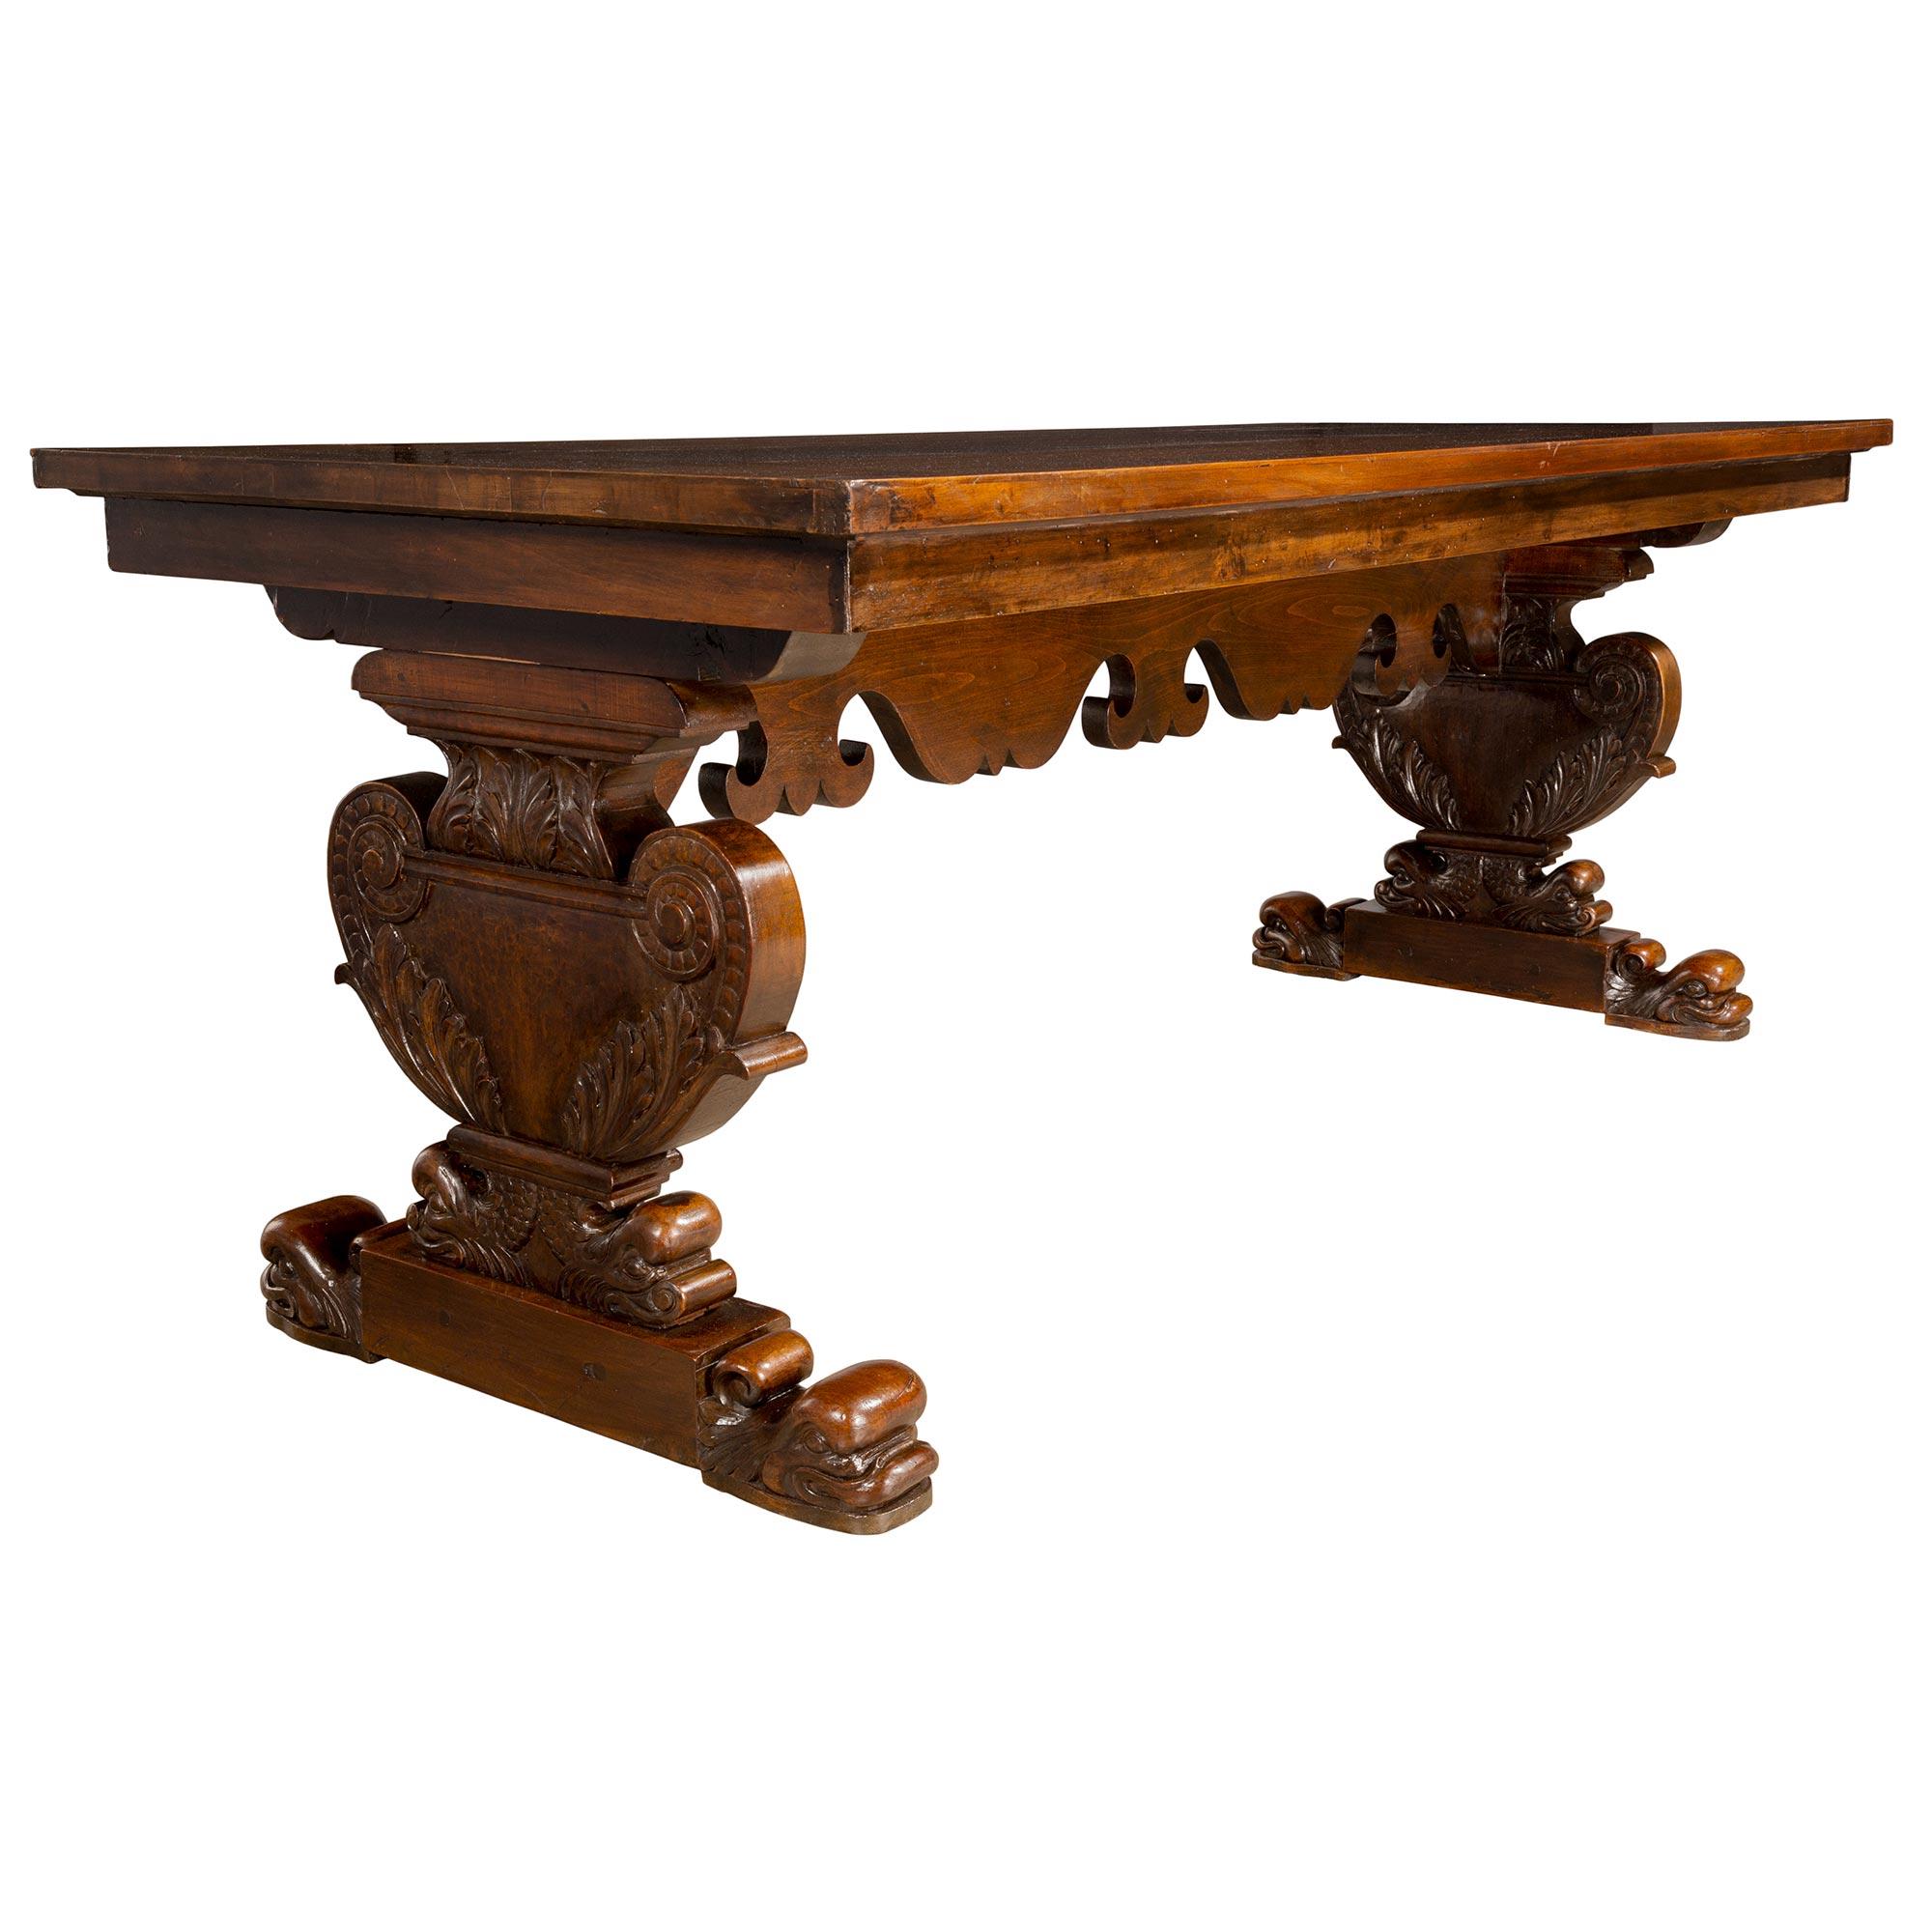 Italian Early 19th Century Solid Walnut Dining Table In Good Condition For Sale In West Palm Beach, FL